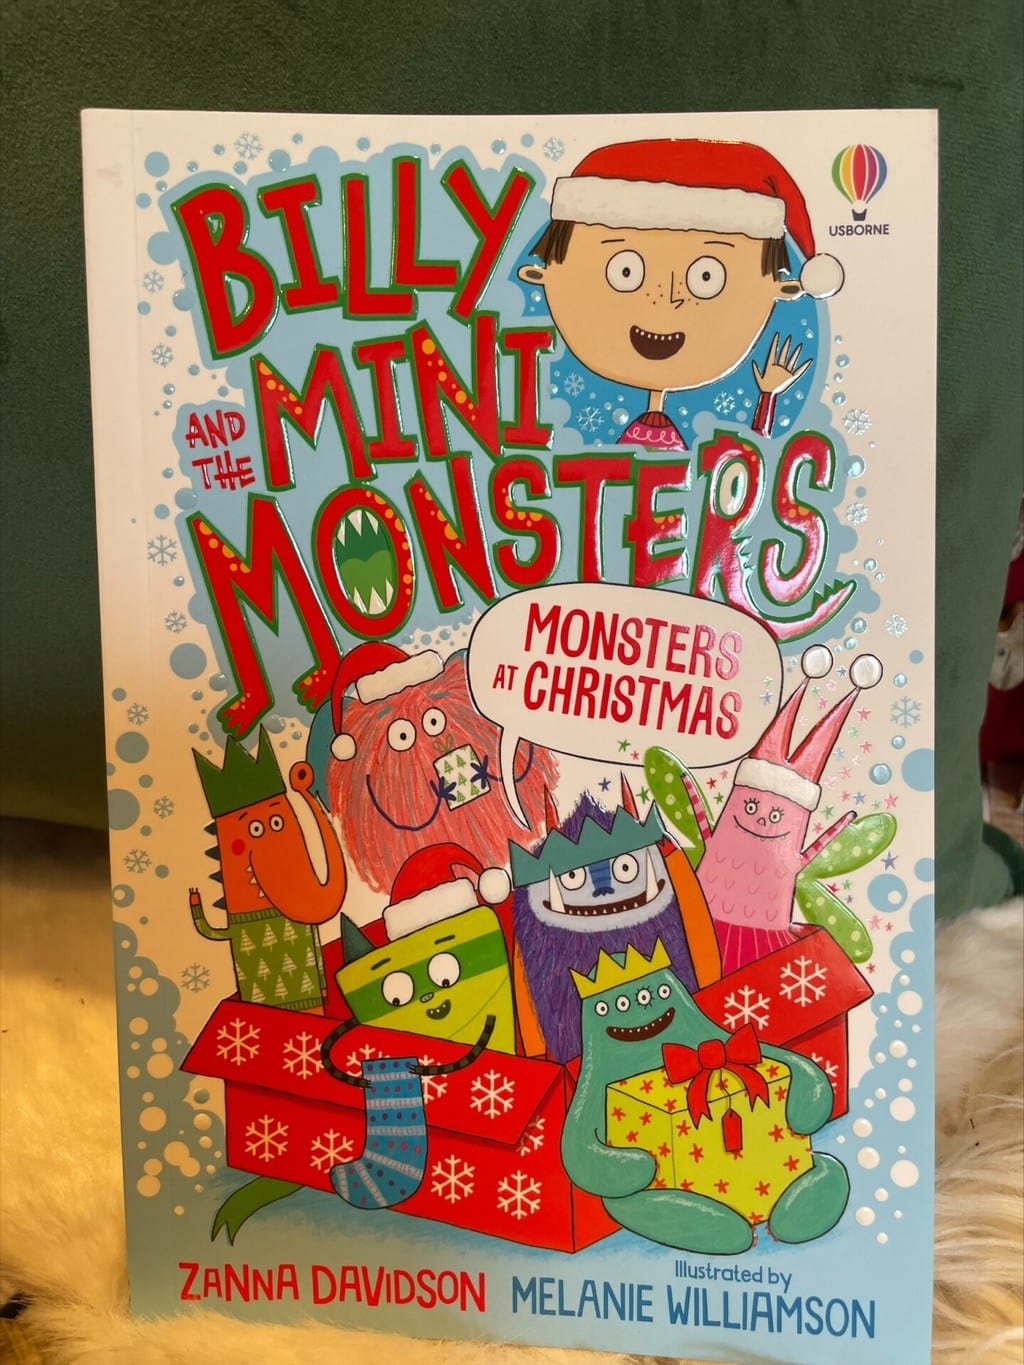 Billy and the Mini Monsters – Monsters at Christmas – Zannia Davidson (author), Melanie Williamson (illustrator), Usborne (publisher)